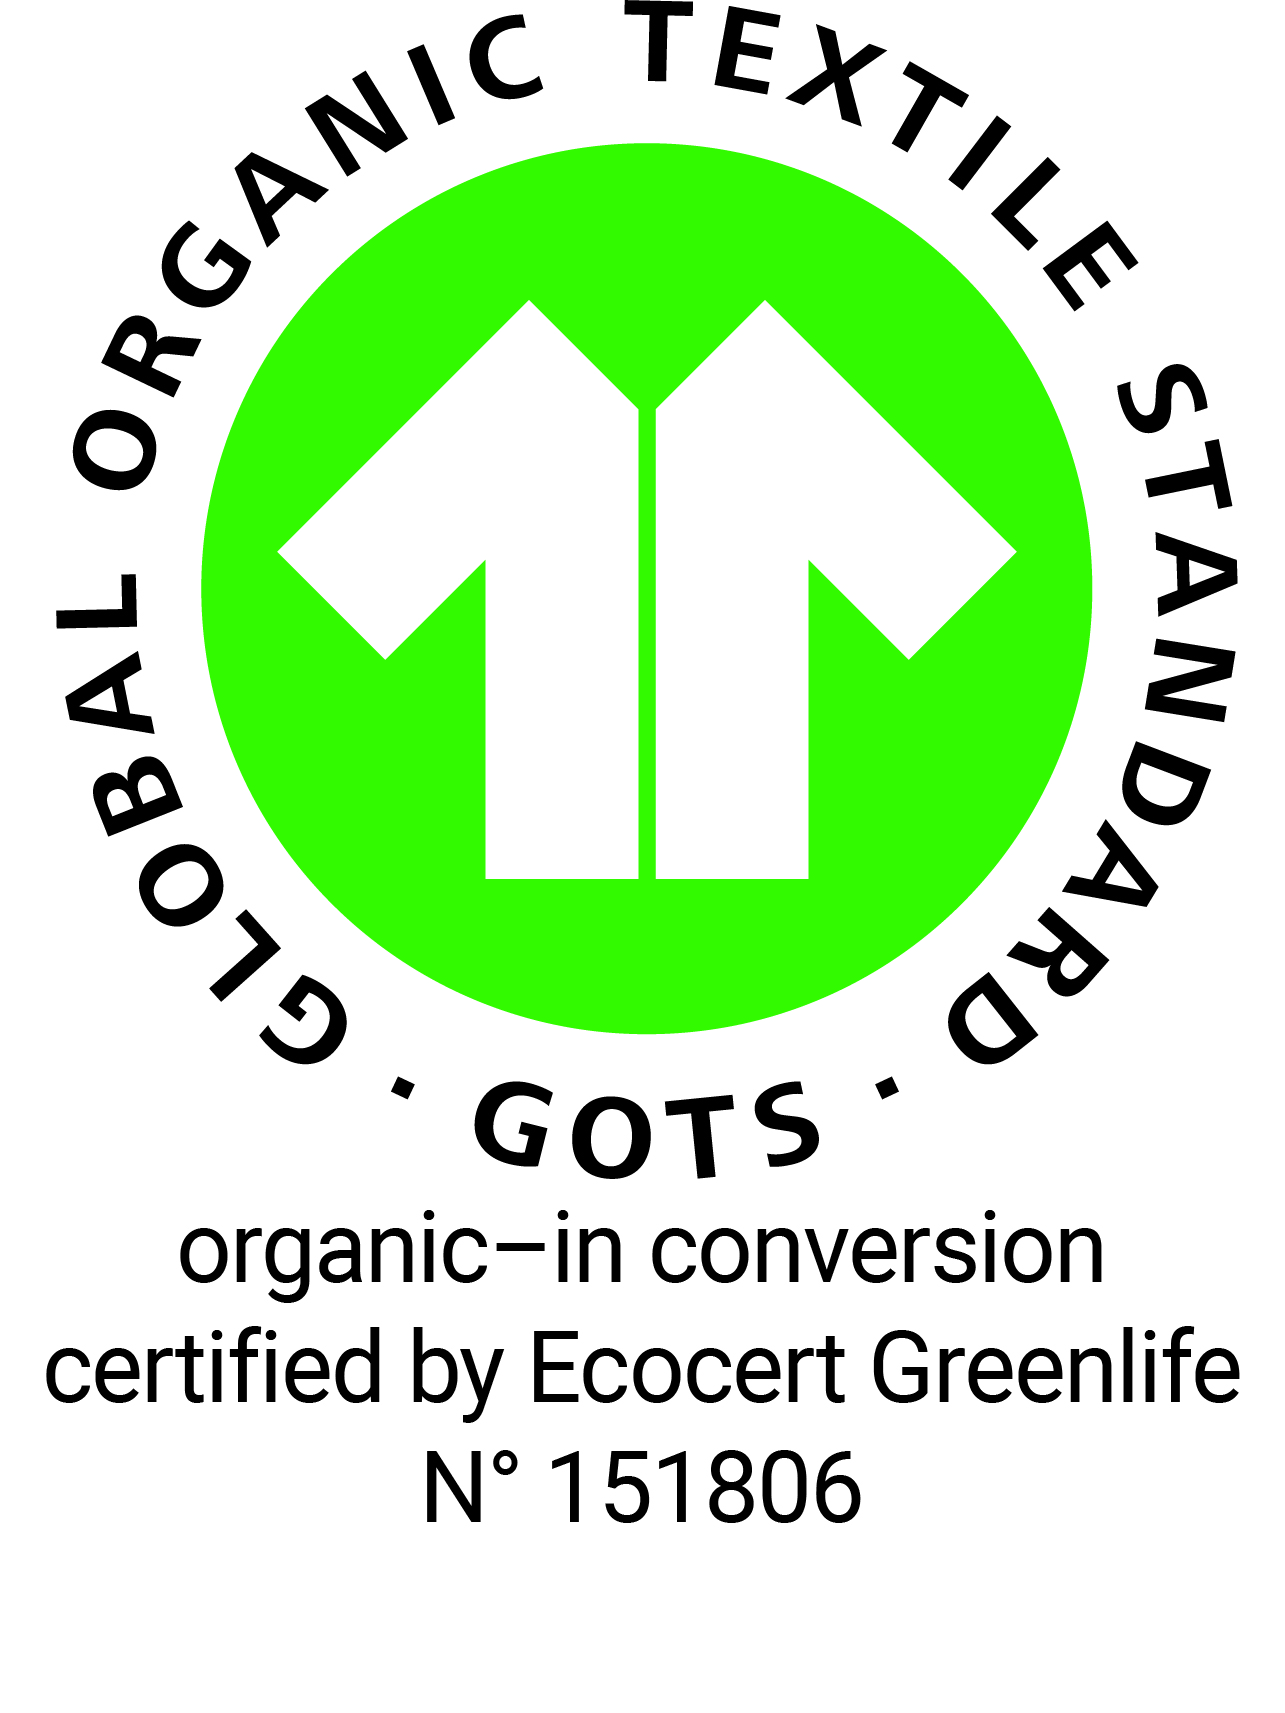 organic in conversion certified by Ecocert Greenlife N° 151806